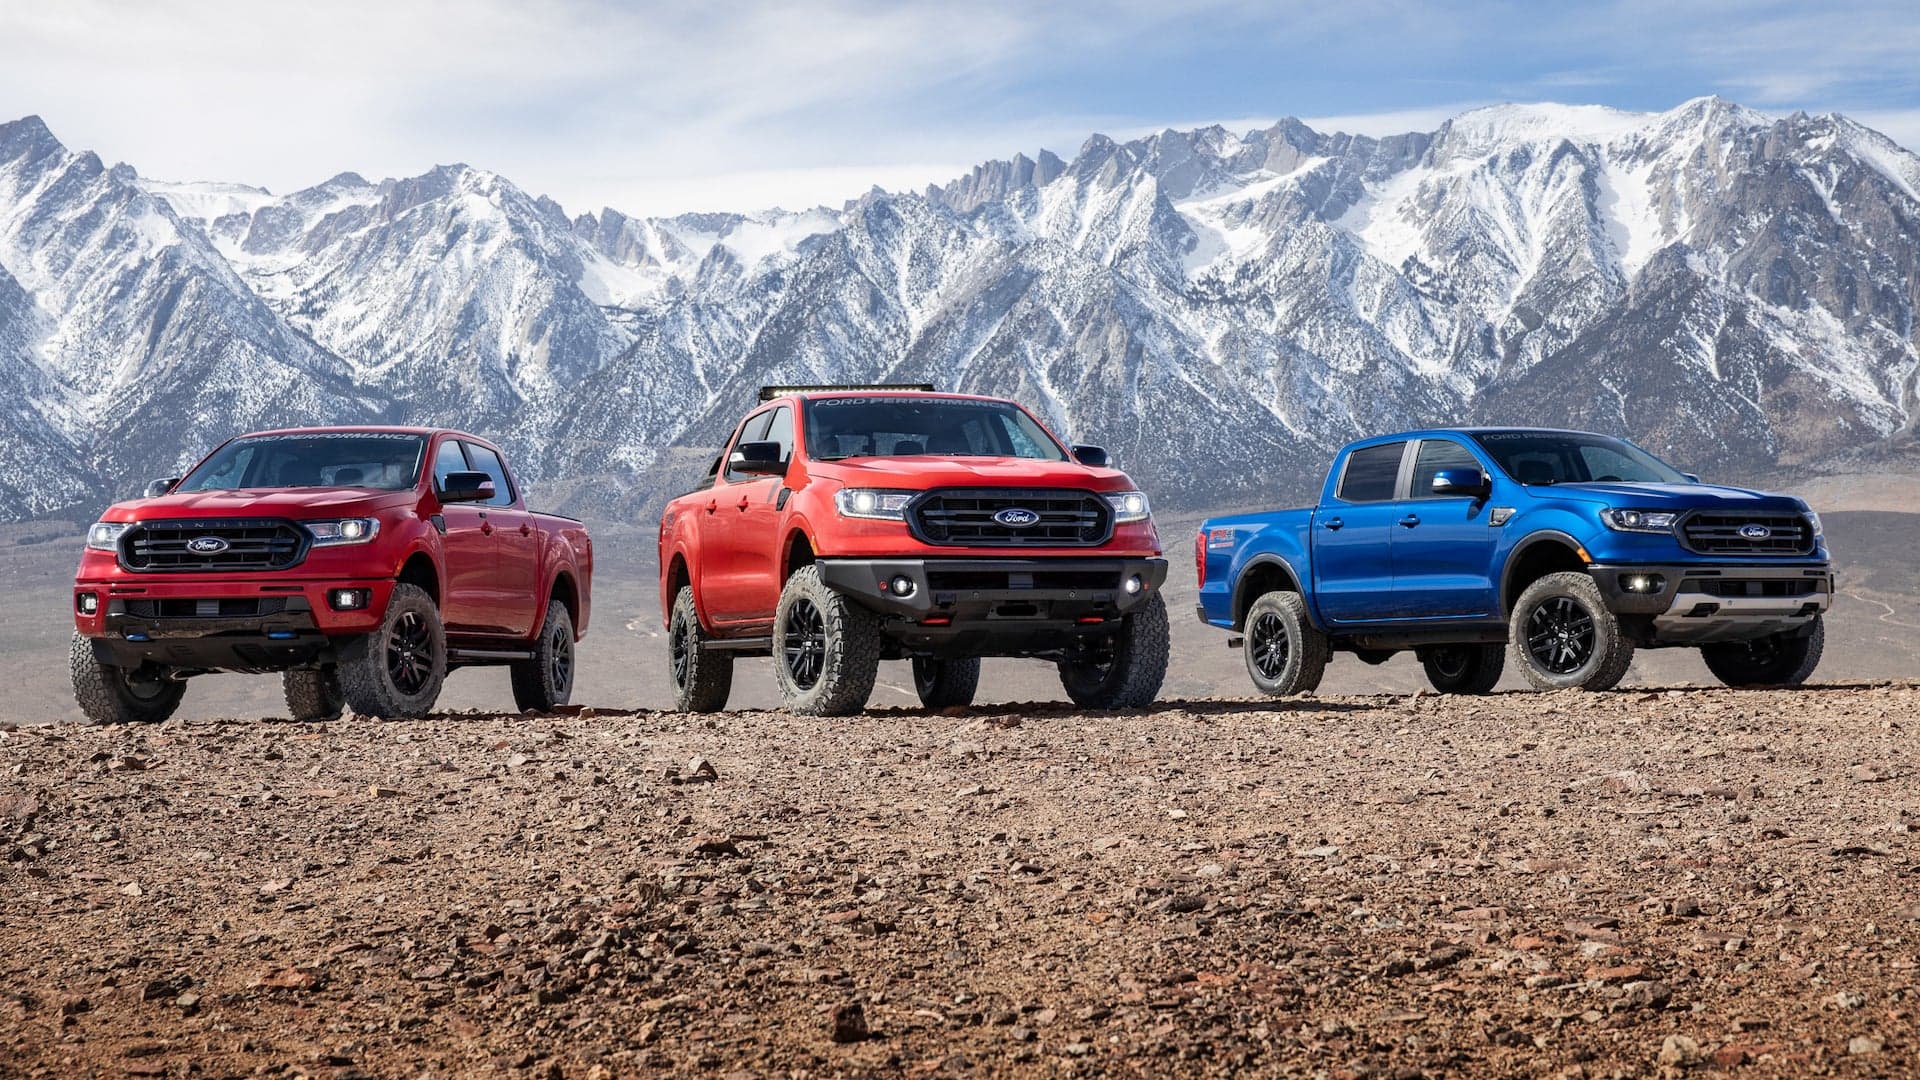 Ford Won’t Give Us a Ranger Raptor? Buy These Kits Instead